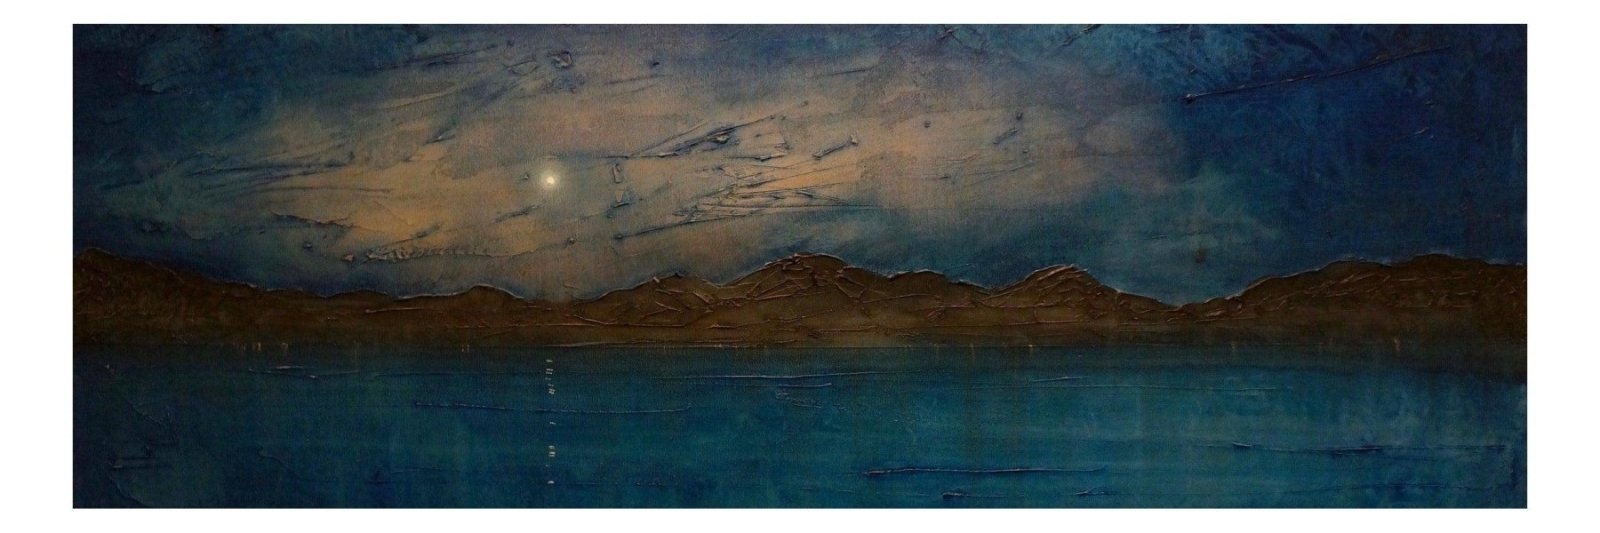 Clyde Prussian Moonlight-Panoramic Prints-River Clyde Art Gallery-Paintings, Prints, Homeware, Art Gifts From Scotland By Scottish Artist Kevin Hunter